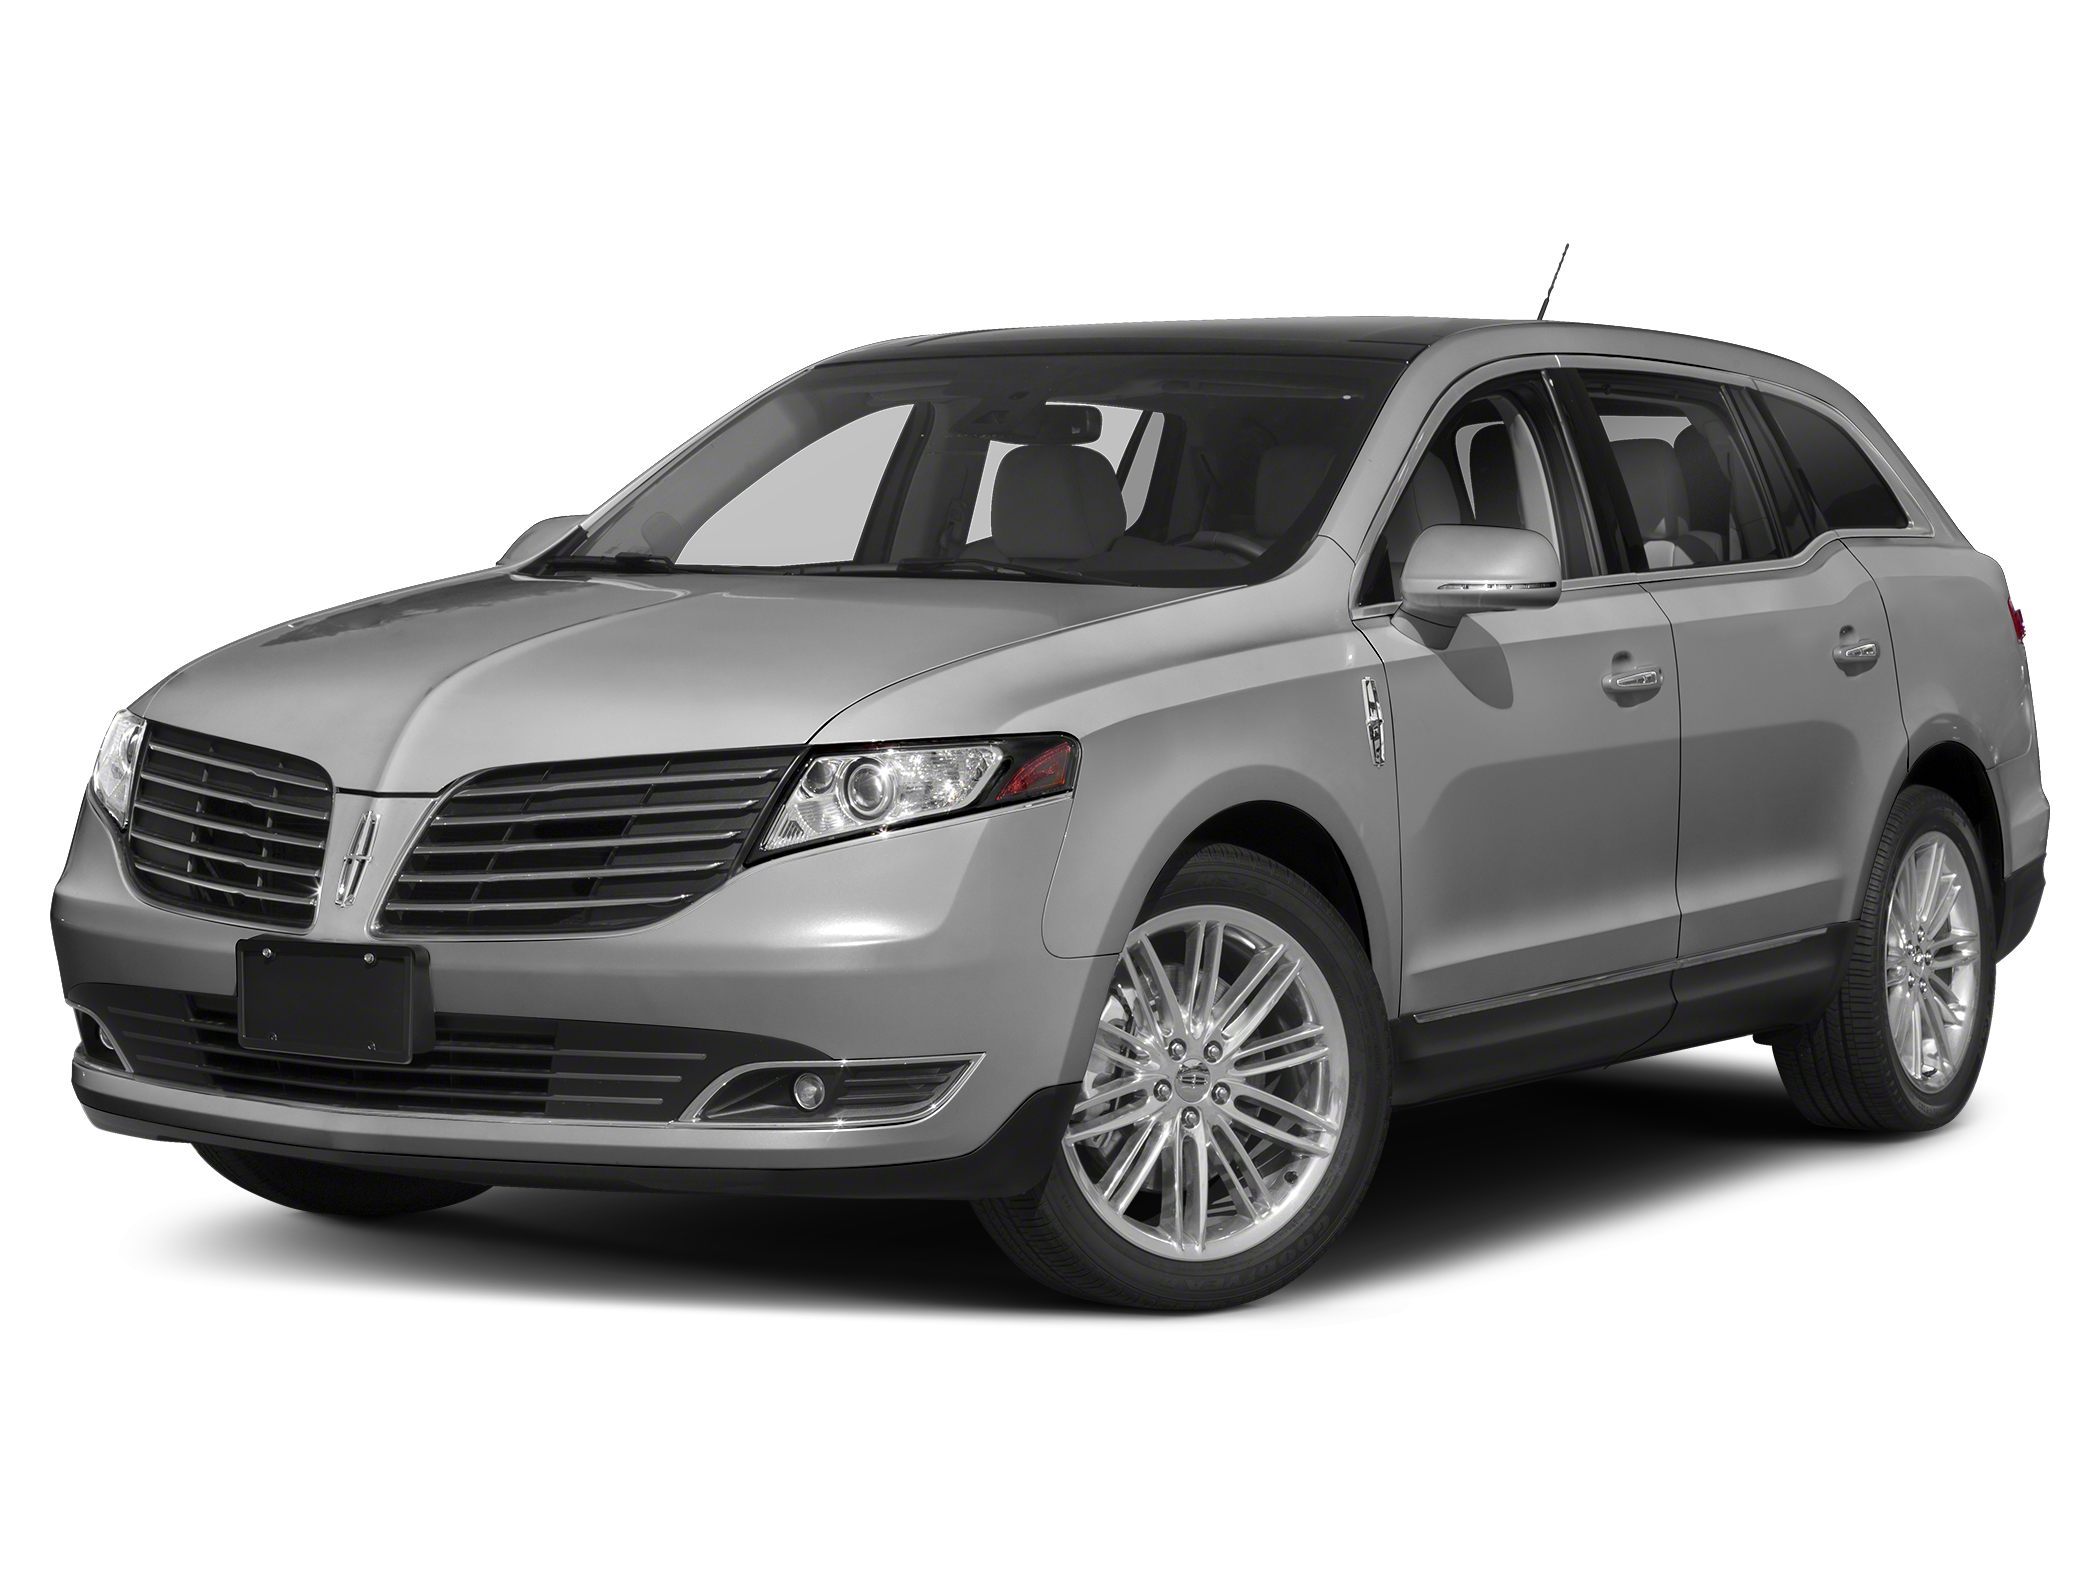 Used 2019 Lincoln MKT For Sale at Ed Wallace Ford | VIN: 2LMHJ5AT5KBL03105